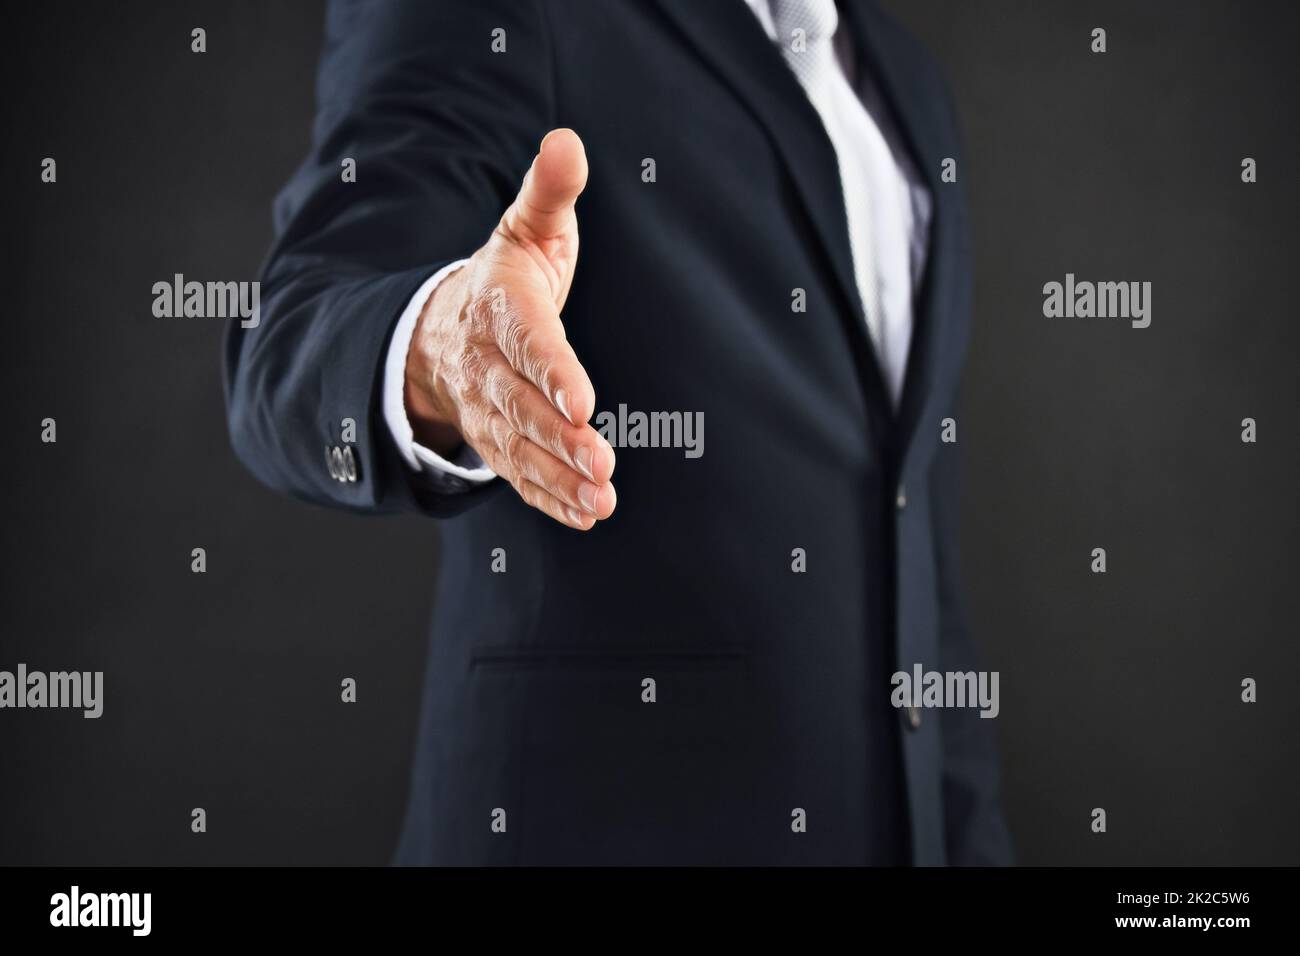 Lets do business. Cropped shot of a businessman extending his arm to shake hands against a black background. Stock Photo